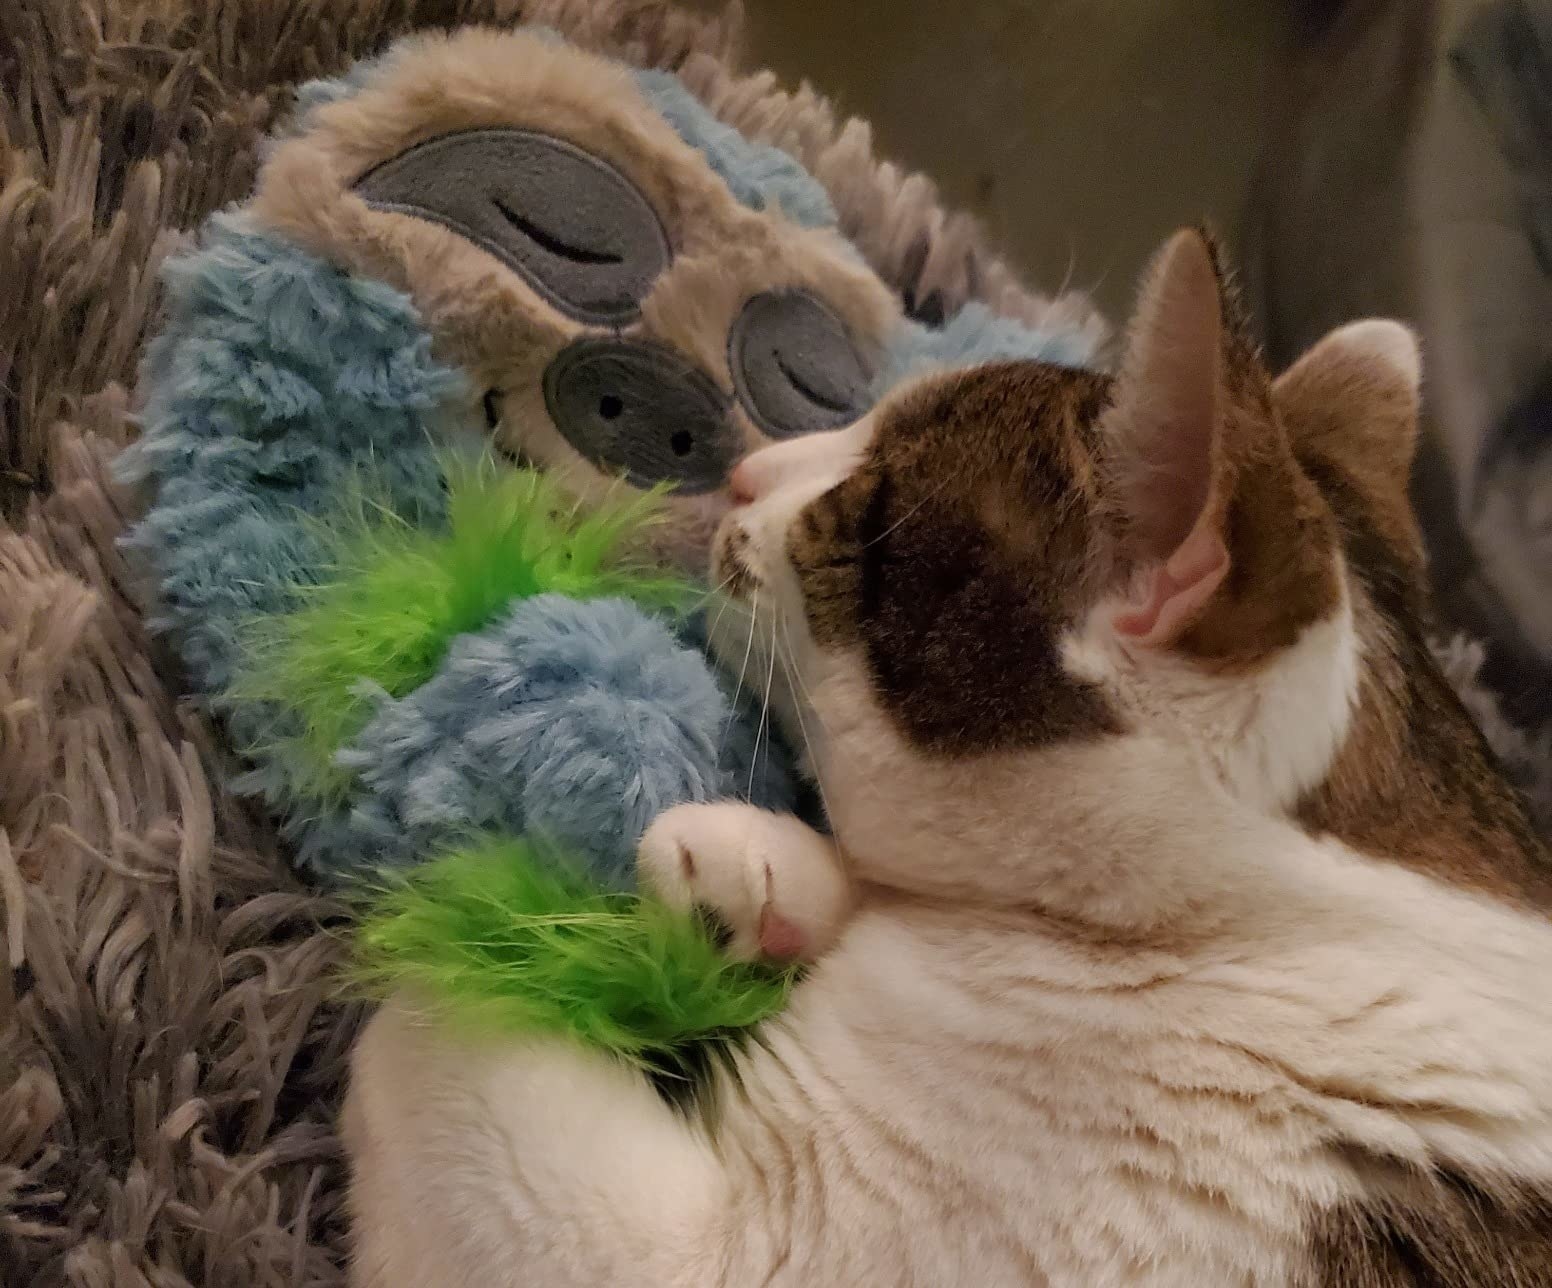 White and brown cat snuggling next to blue sloth toy